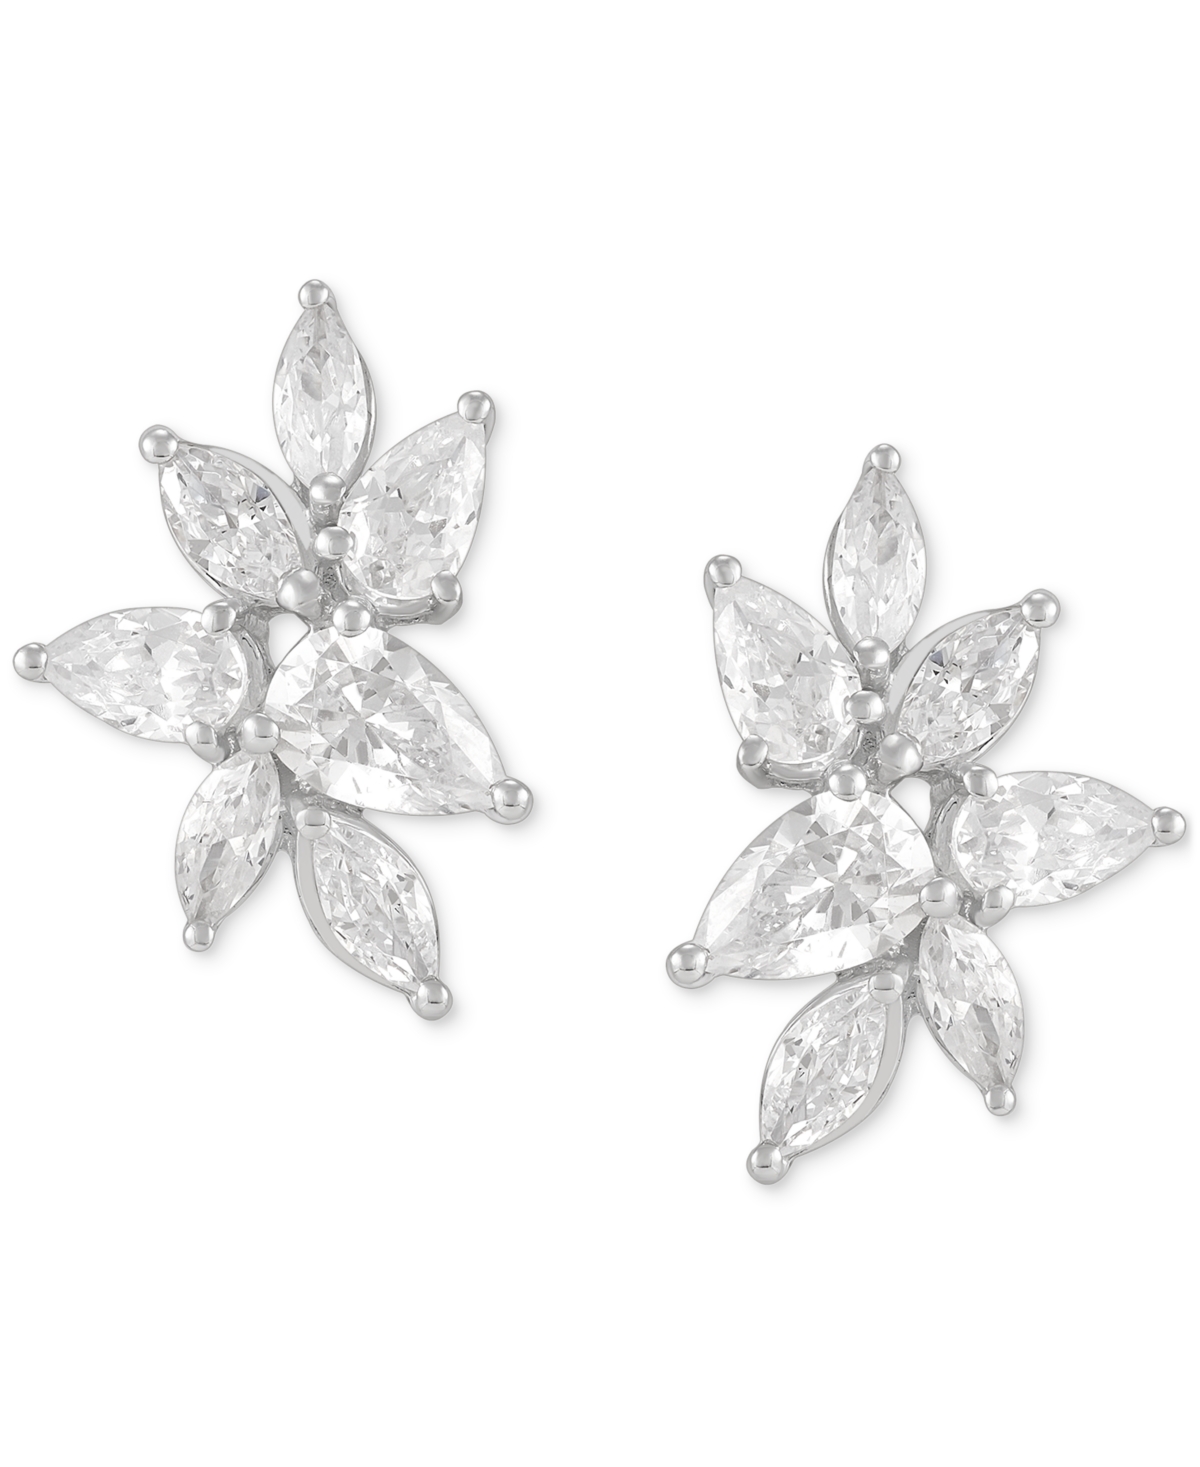 Lab Grown Diamond Marquise & Pear Stud Earrings (1-1/2 ct. t.w.) in 14k White Gold - K White Gold